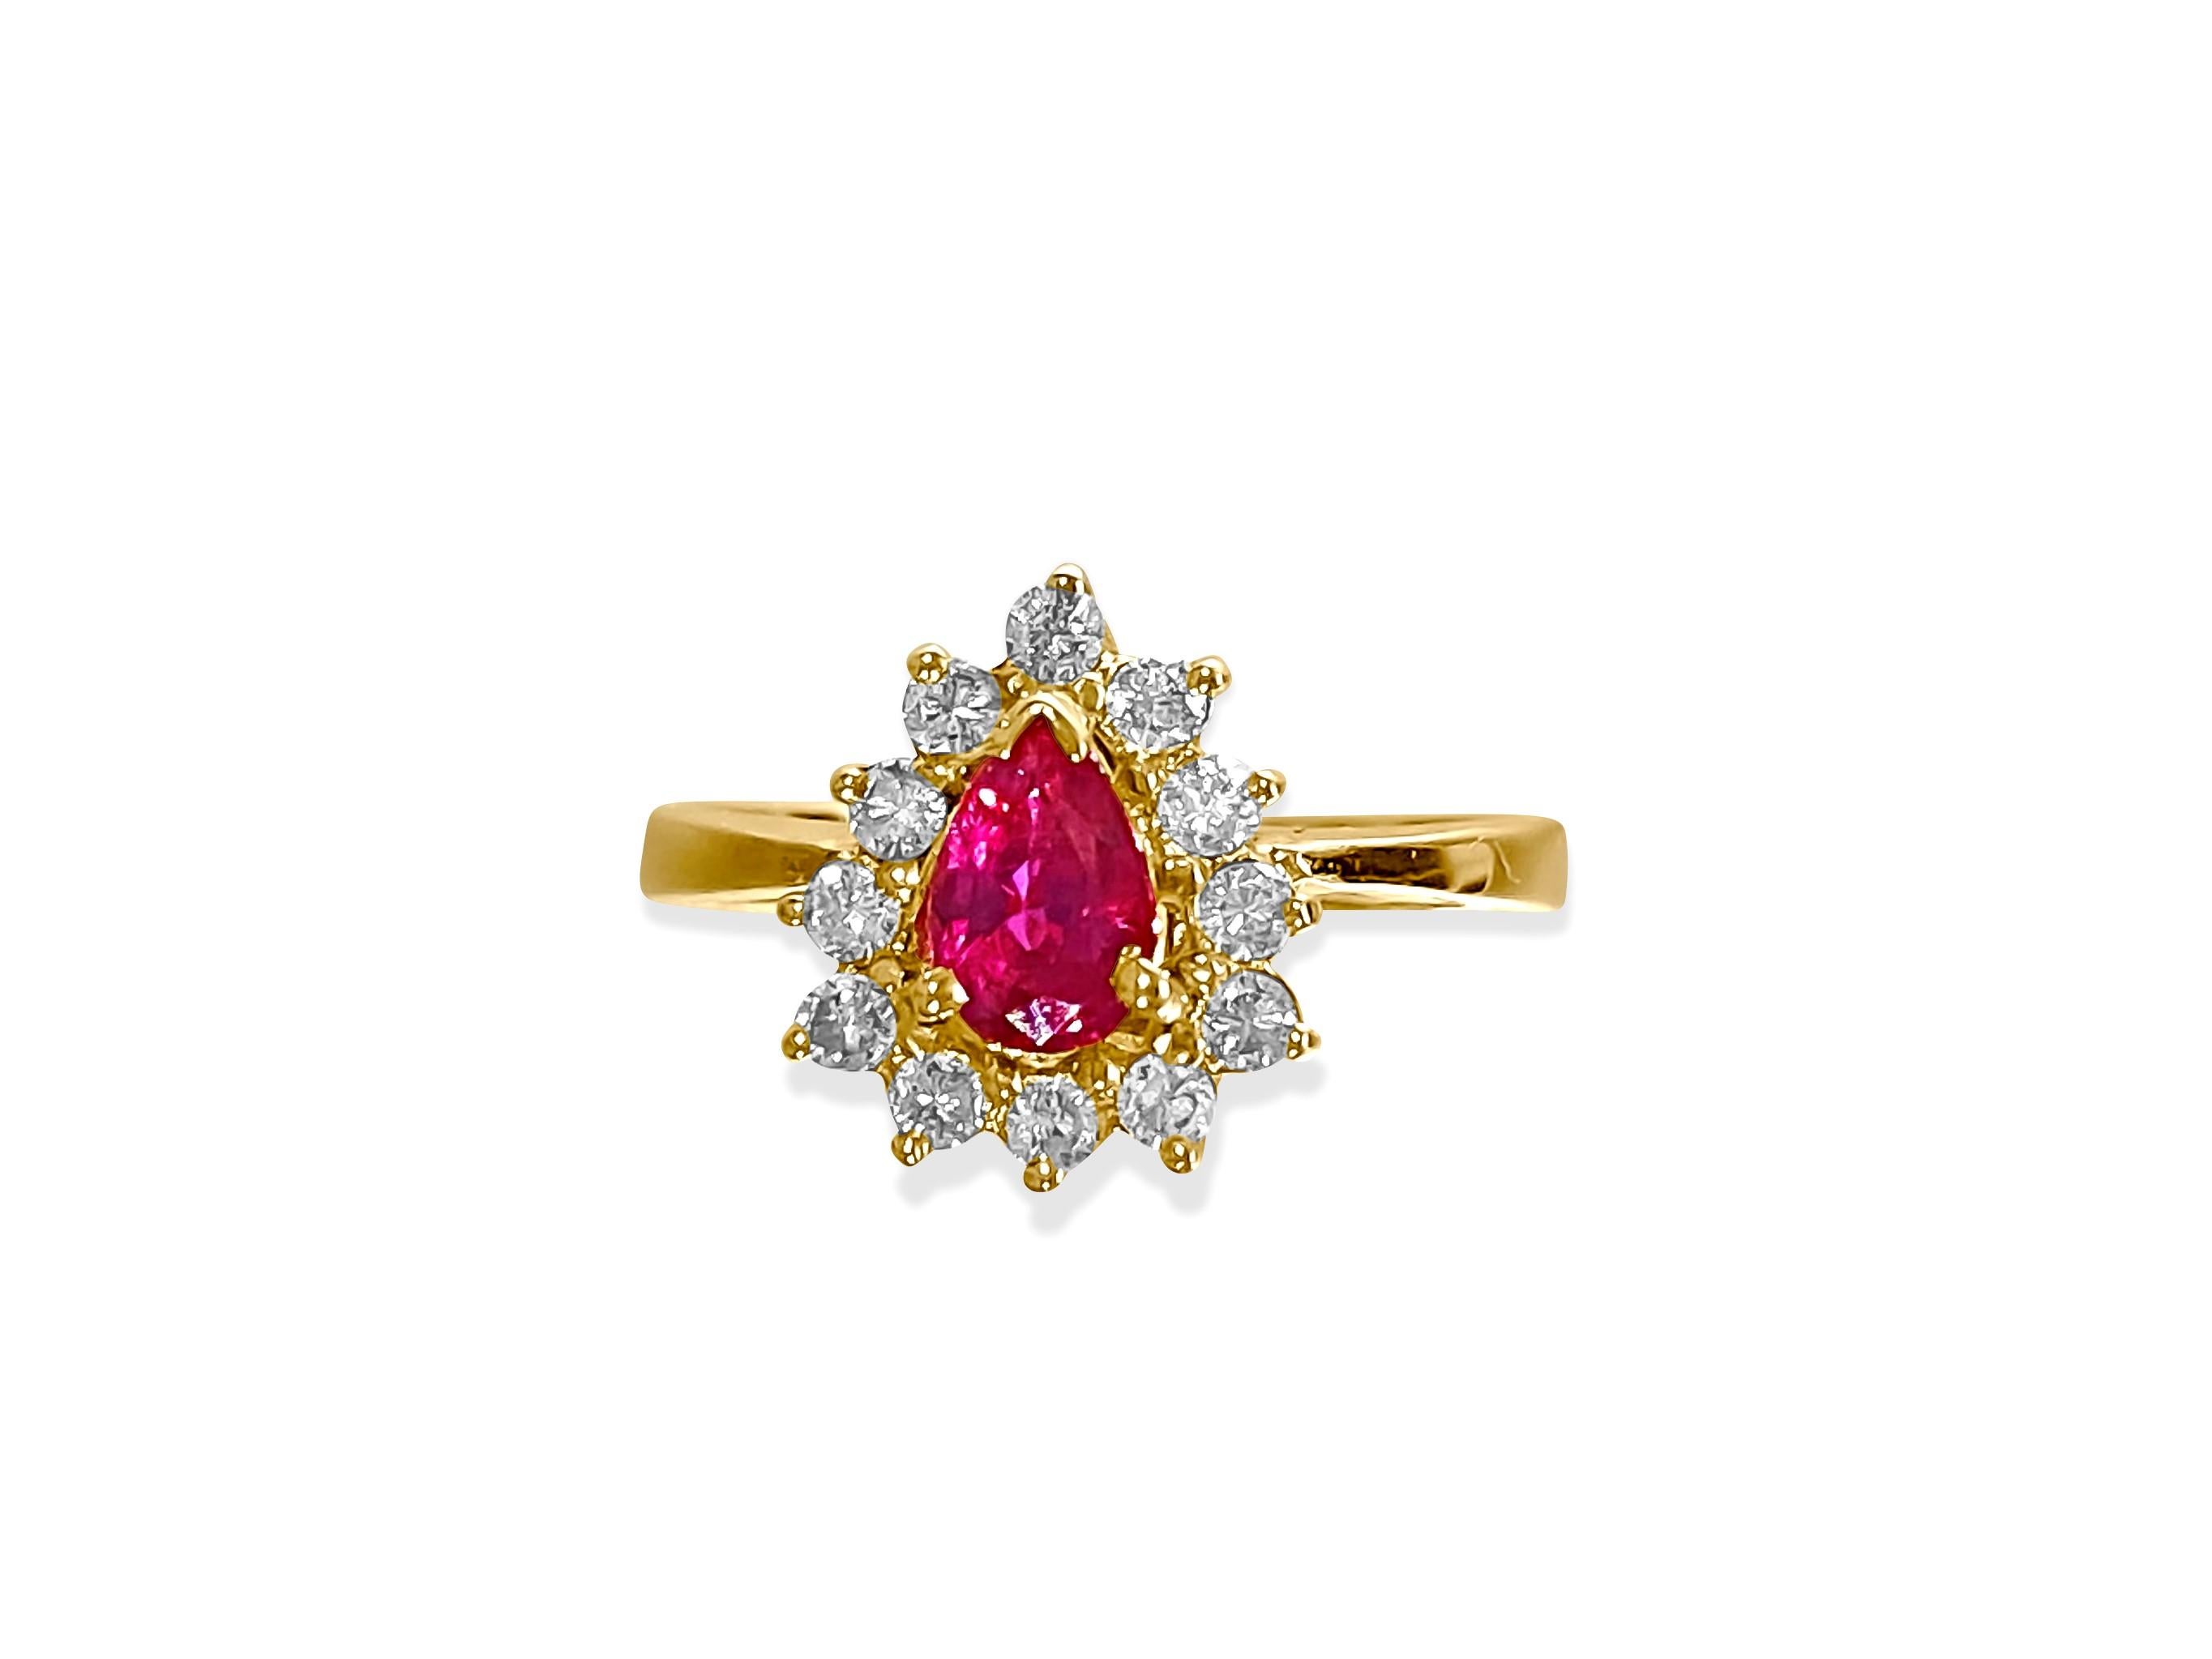 Marquise Cut 1.50 Carat Natural Ruby Diamond Womens Ring 14 Karat Yellow Gold For Sale